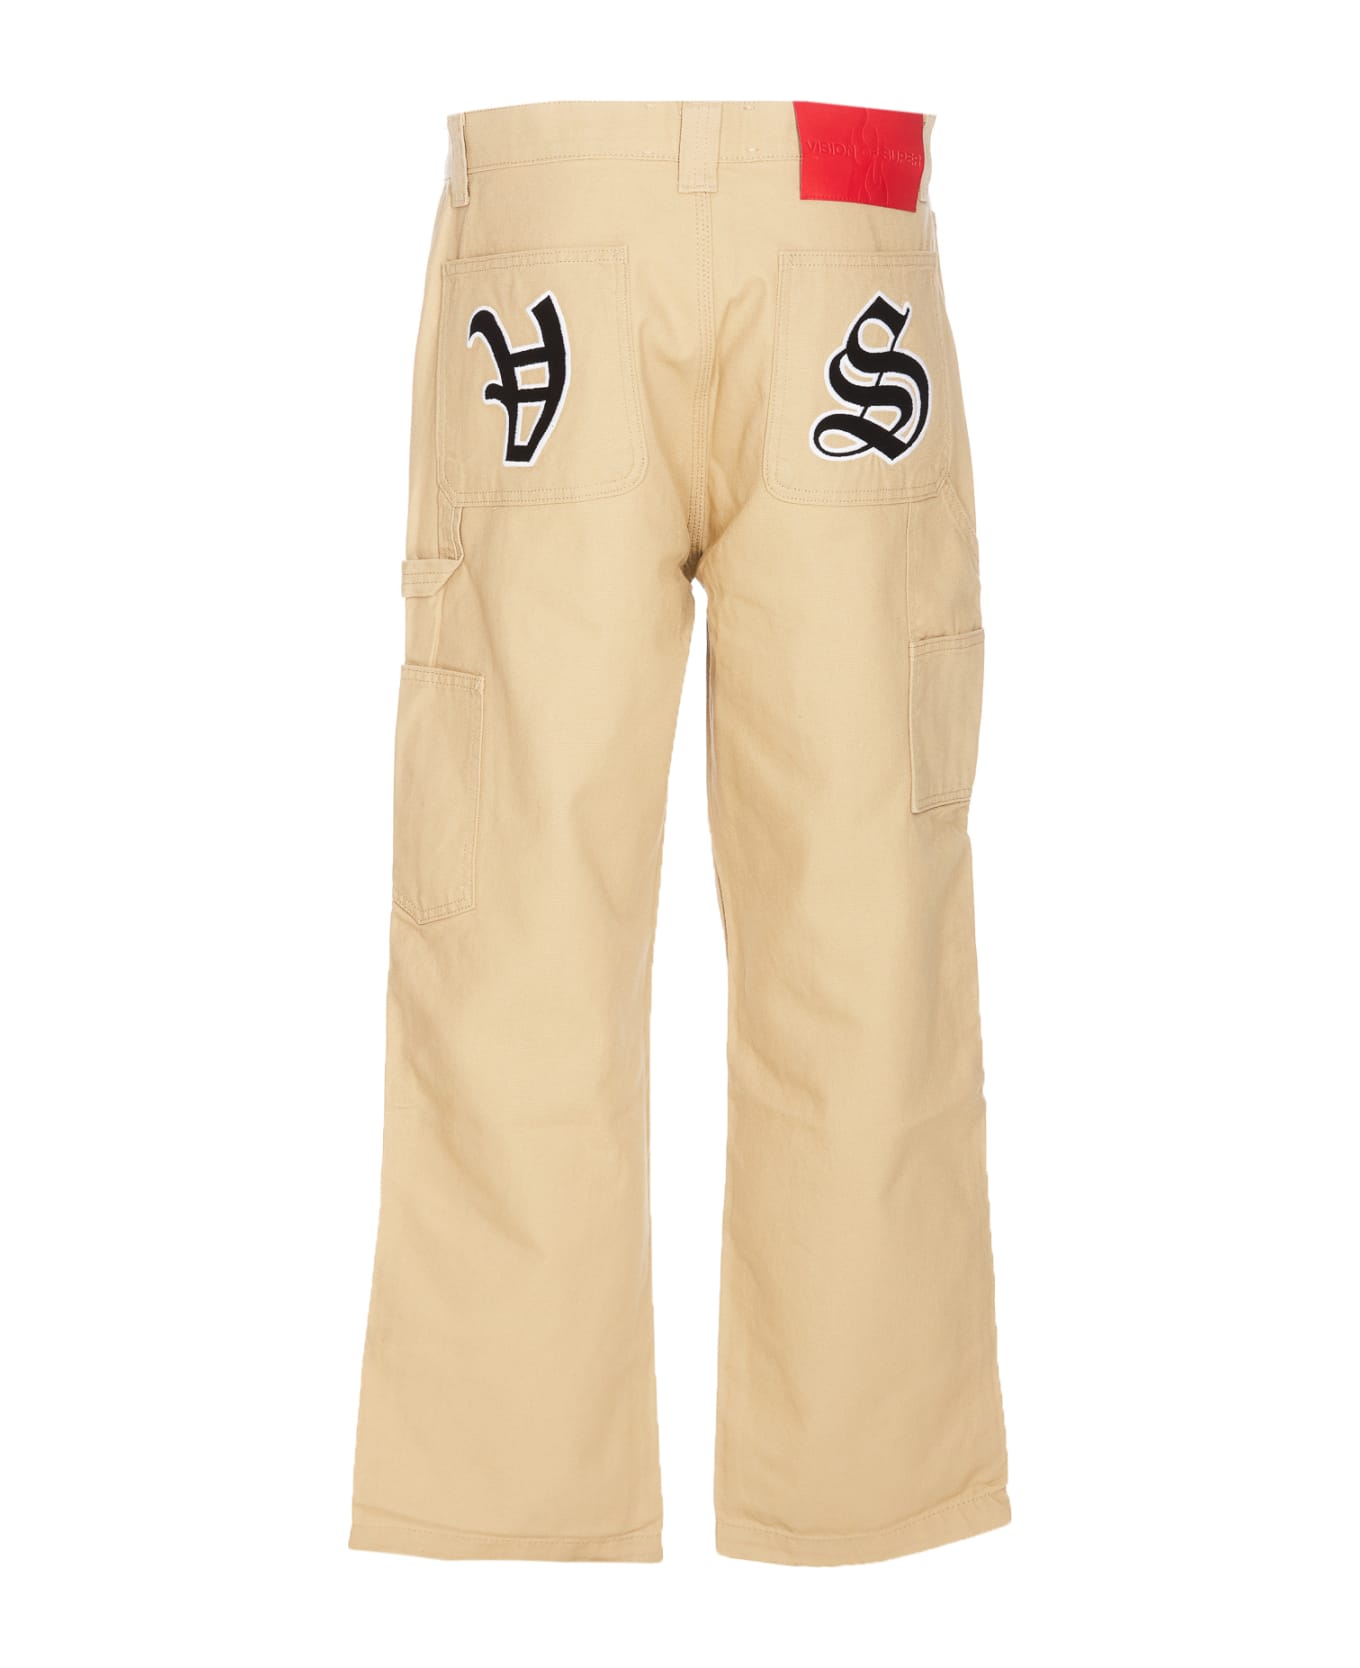 Vision of Super Sand Worker Pants With V-s Gothic Patches - NEUTRALS